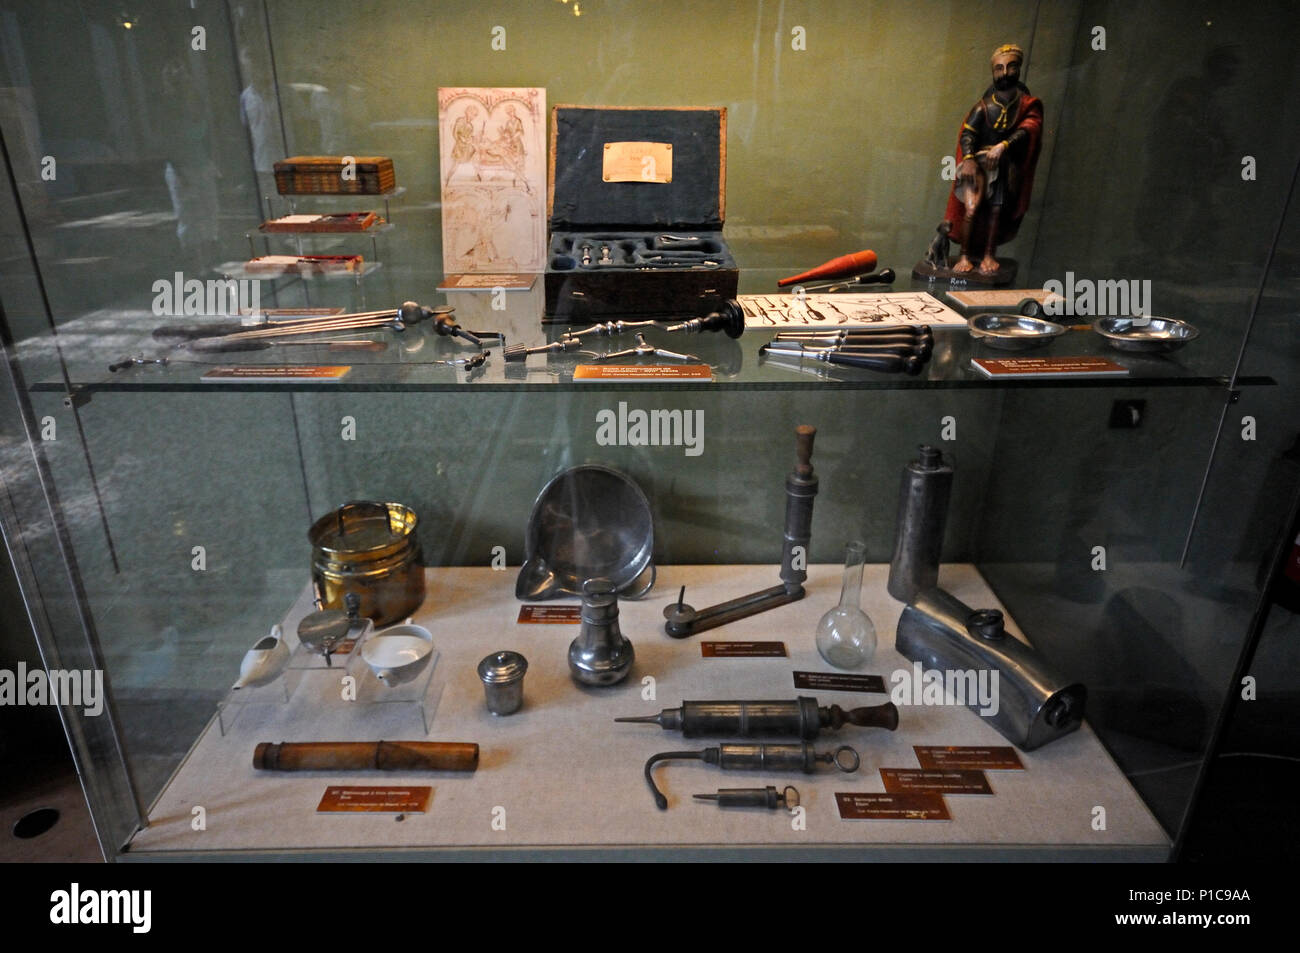 Display cases of medical instruments in medieval hospital “Hotel Dieu” Beaune France   “HOTEL DIEU” BEAUNE FRANCE MEDICAL INSTRUMENTS 0P Stock Photo